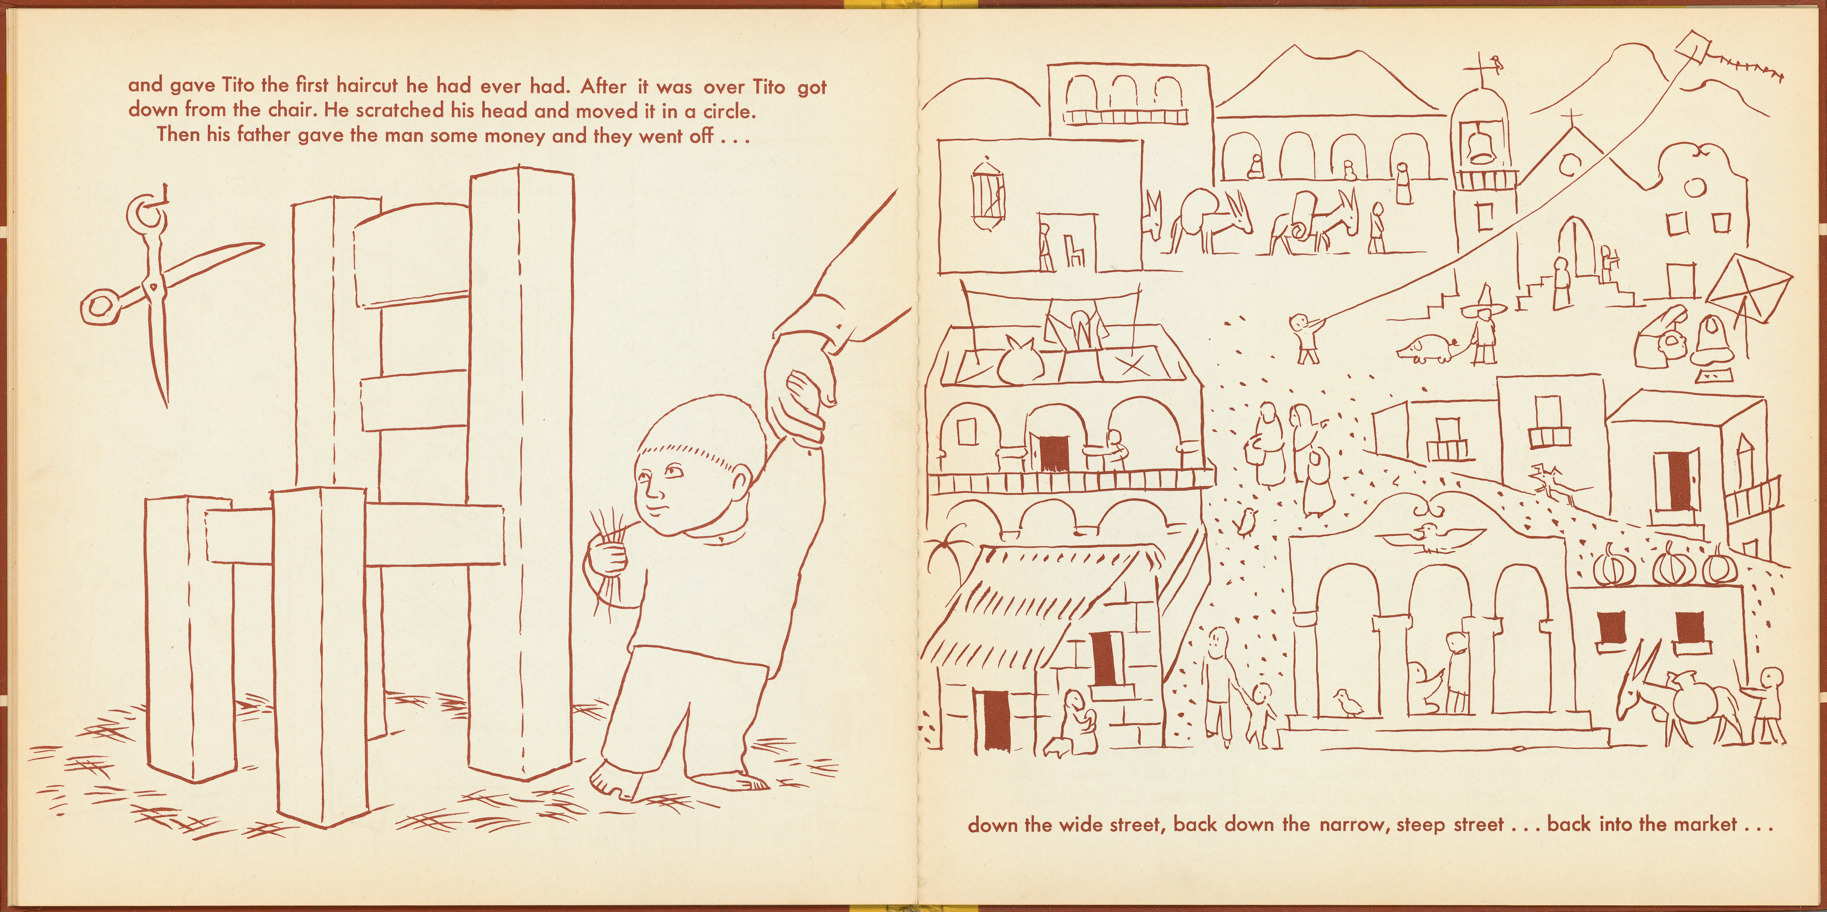 Pages 18–19 of 'Tito's Hats' written by Melchor G. Ferrer.  Illustrations by Jean Charlot.